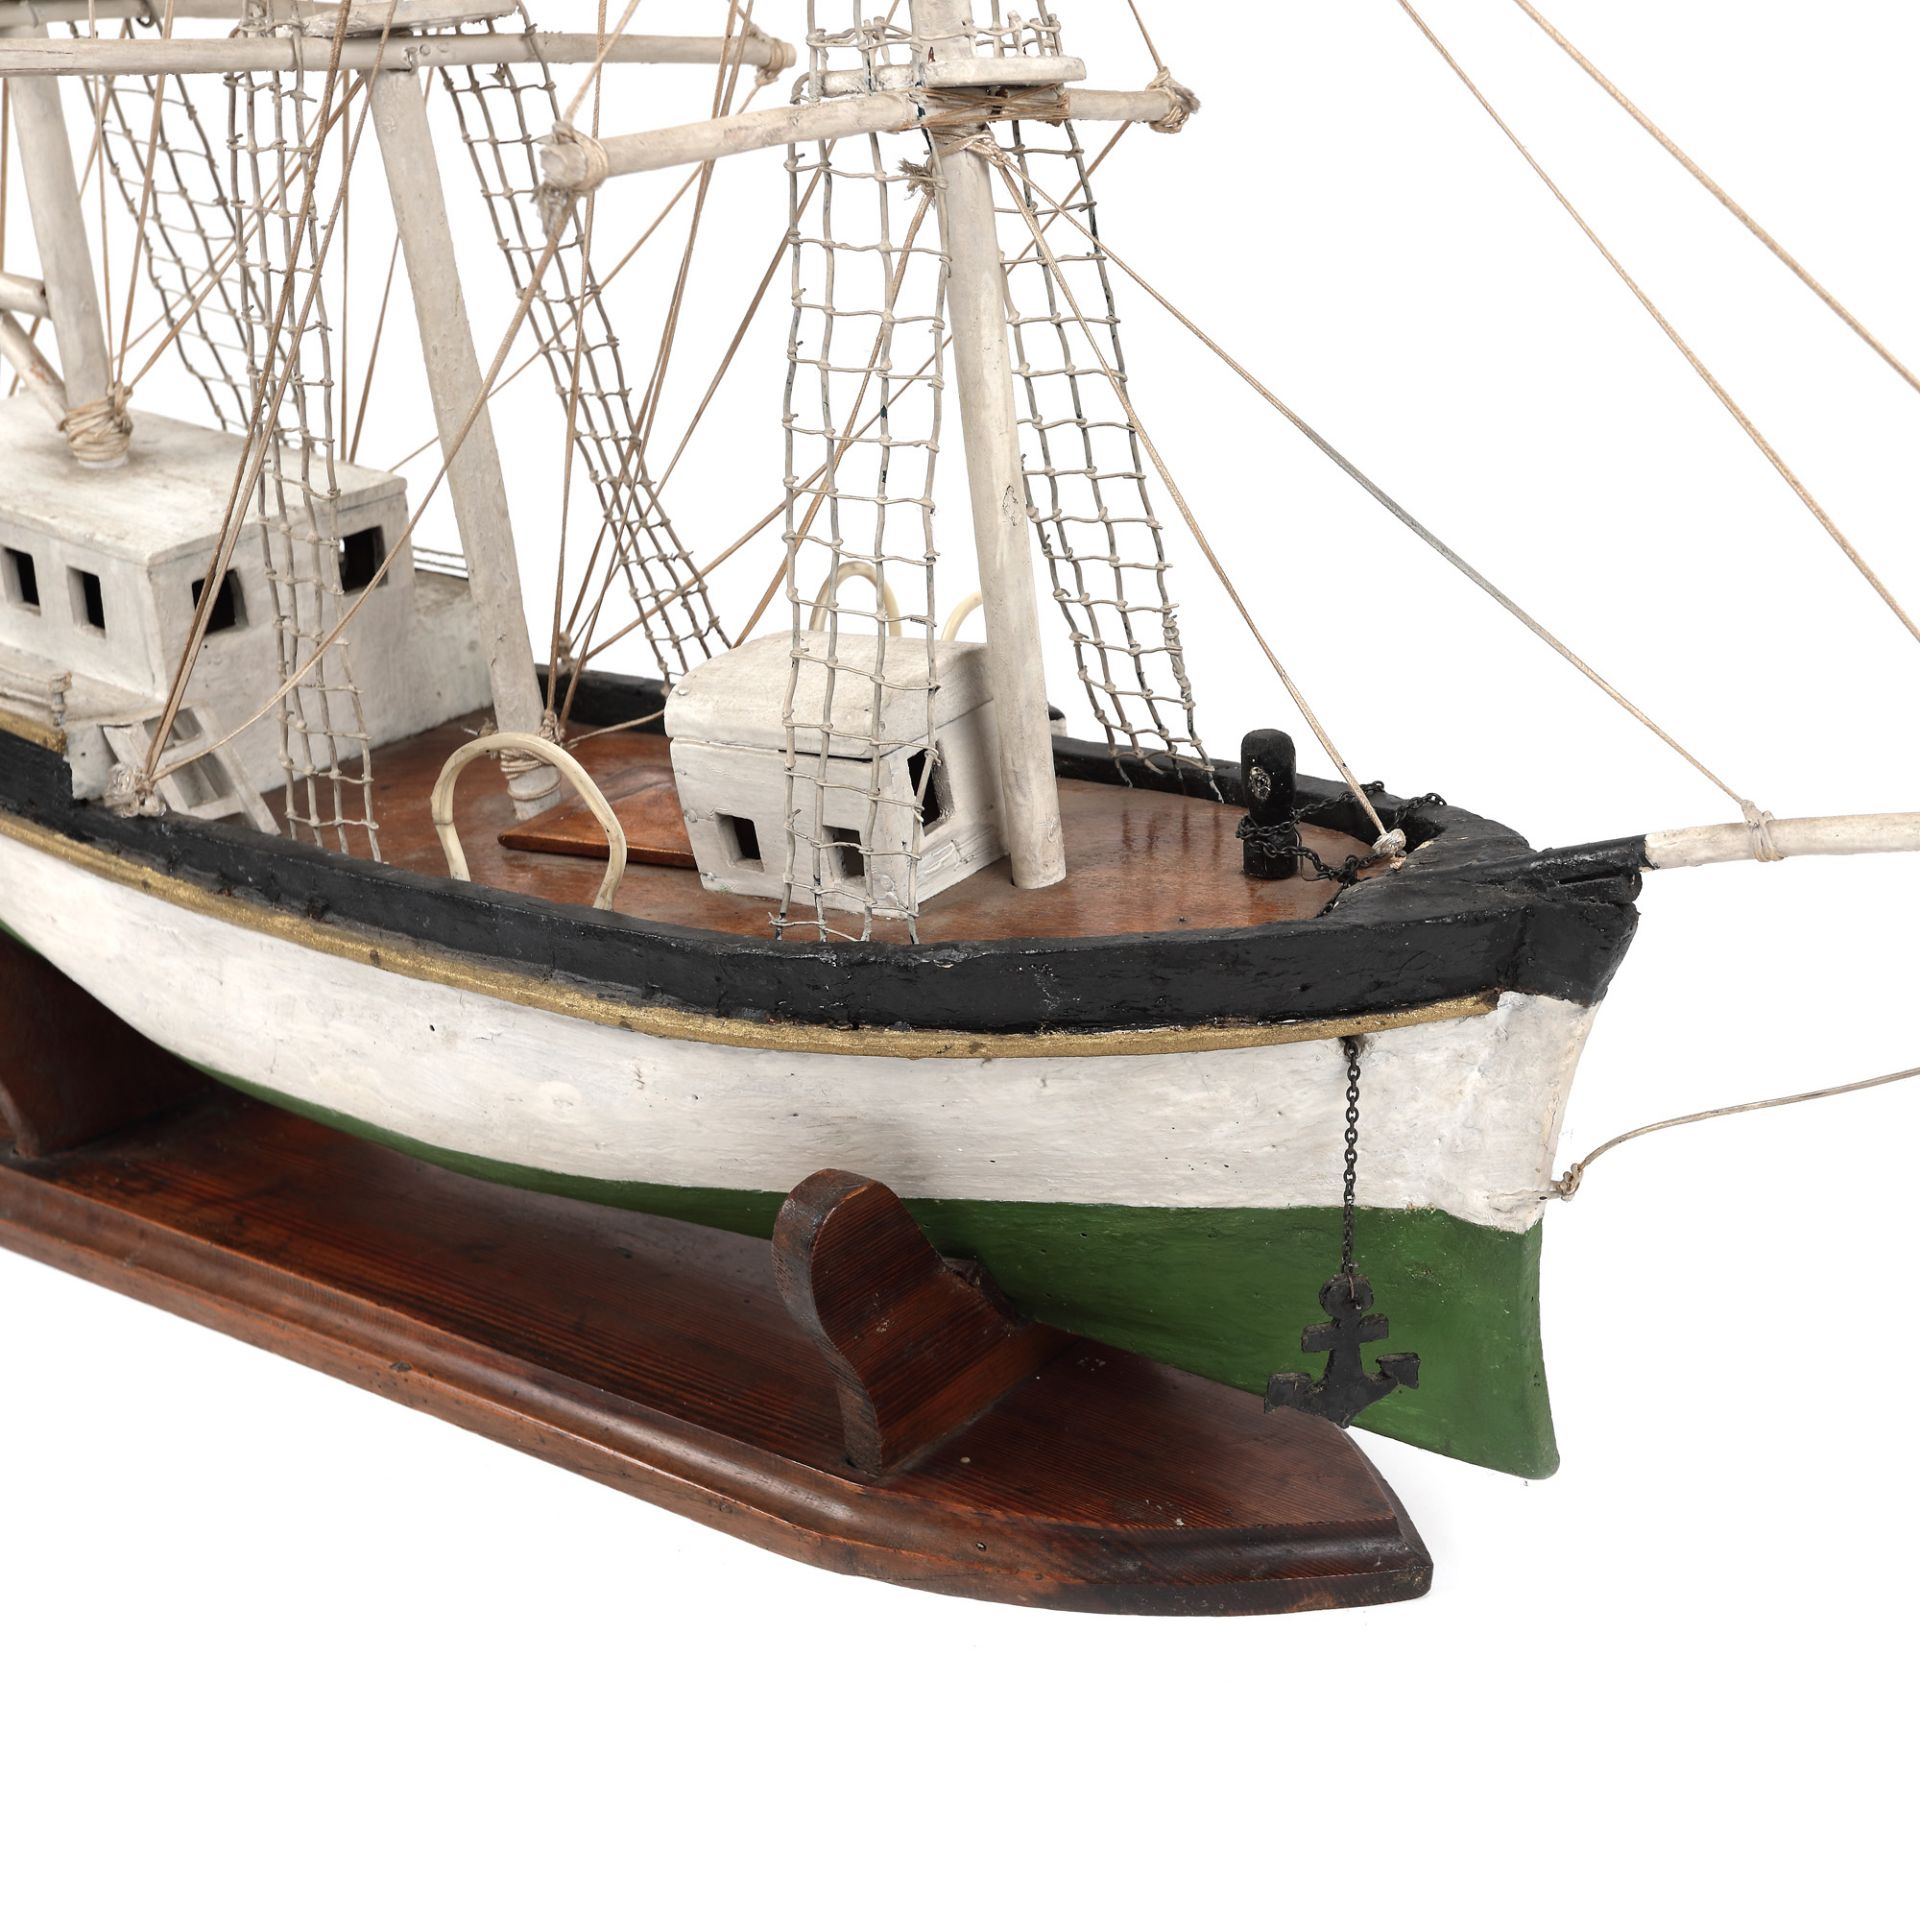 Turkish brig model, painted wood, approx. 1940-1950 - Image 2 of 4